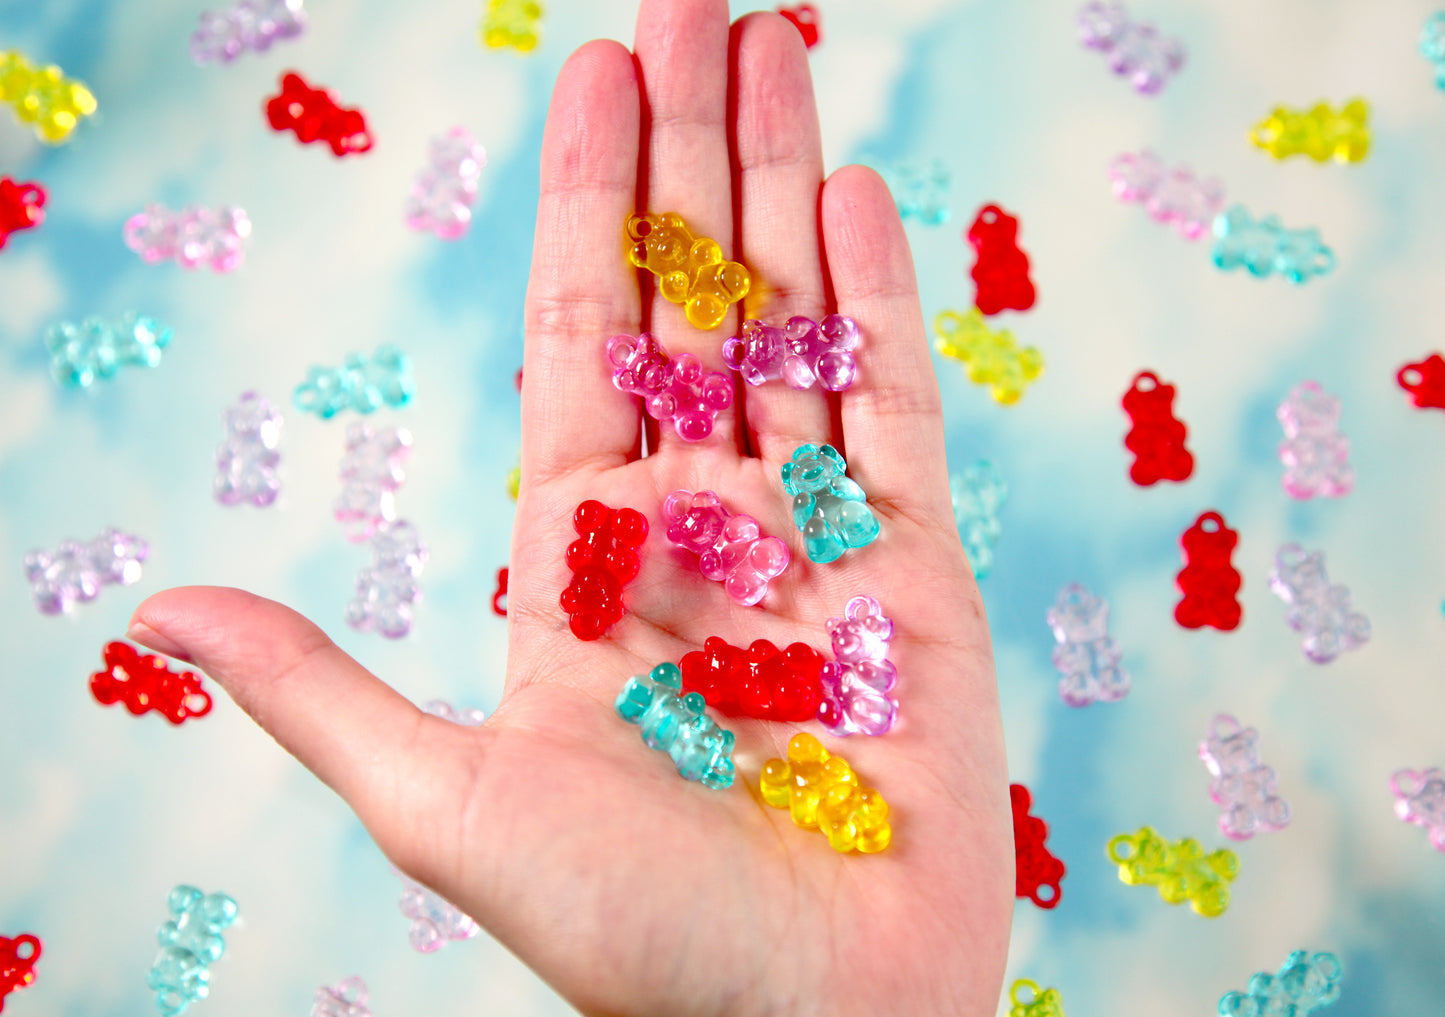 Fake Gummy Bear Charms - 20mm Fake Gummy Bears with Charm Loop - Fake Candy Resin or Plastic Charms - 40 pc set